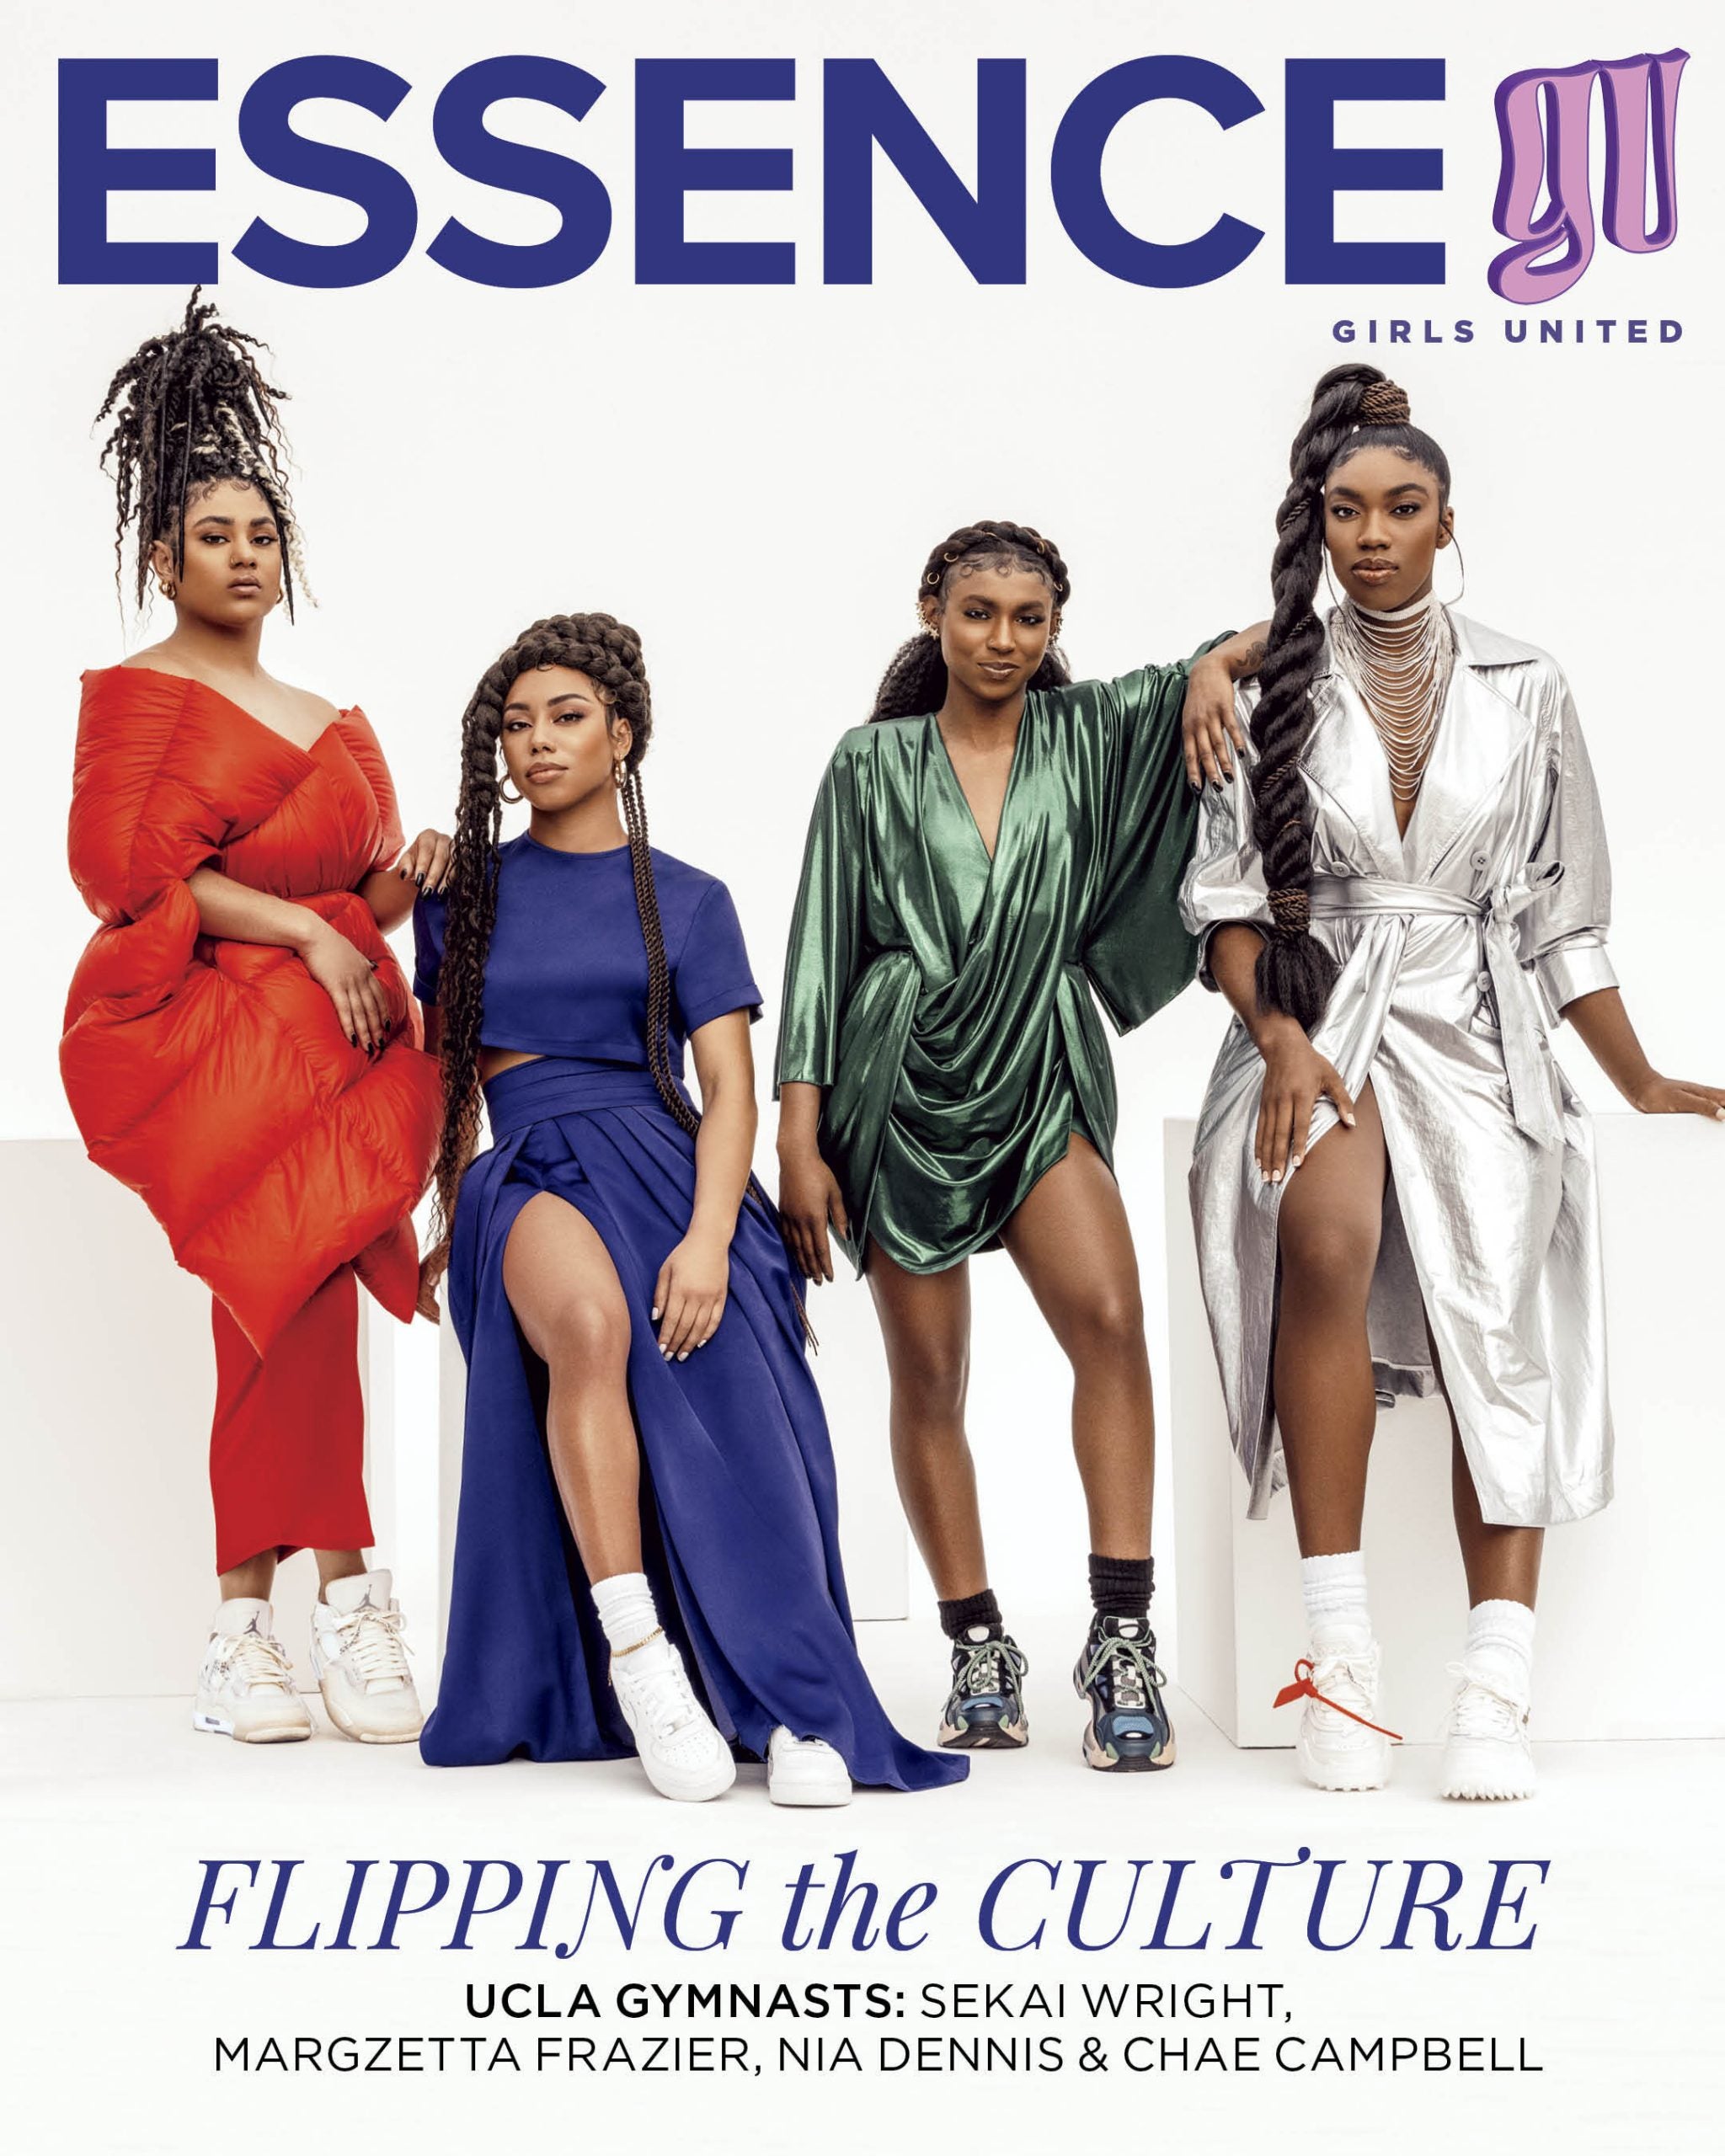 UCLA Gymnasts Celebrate Black Excellence On New Girl United’s Digital Cover